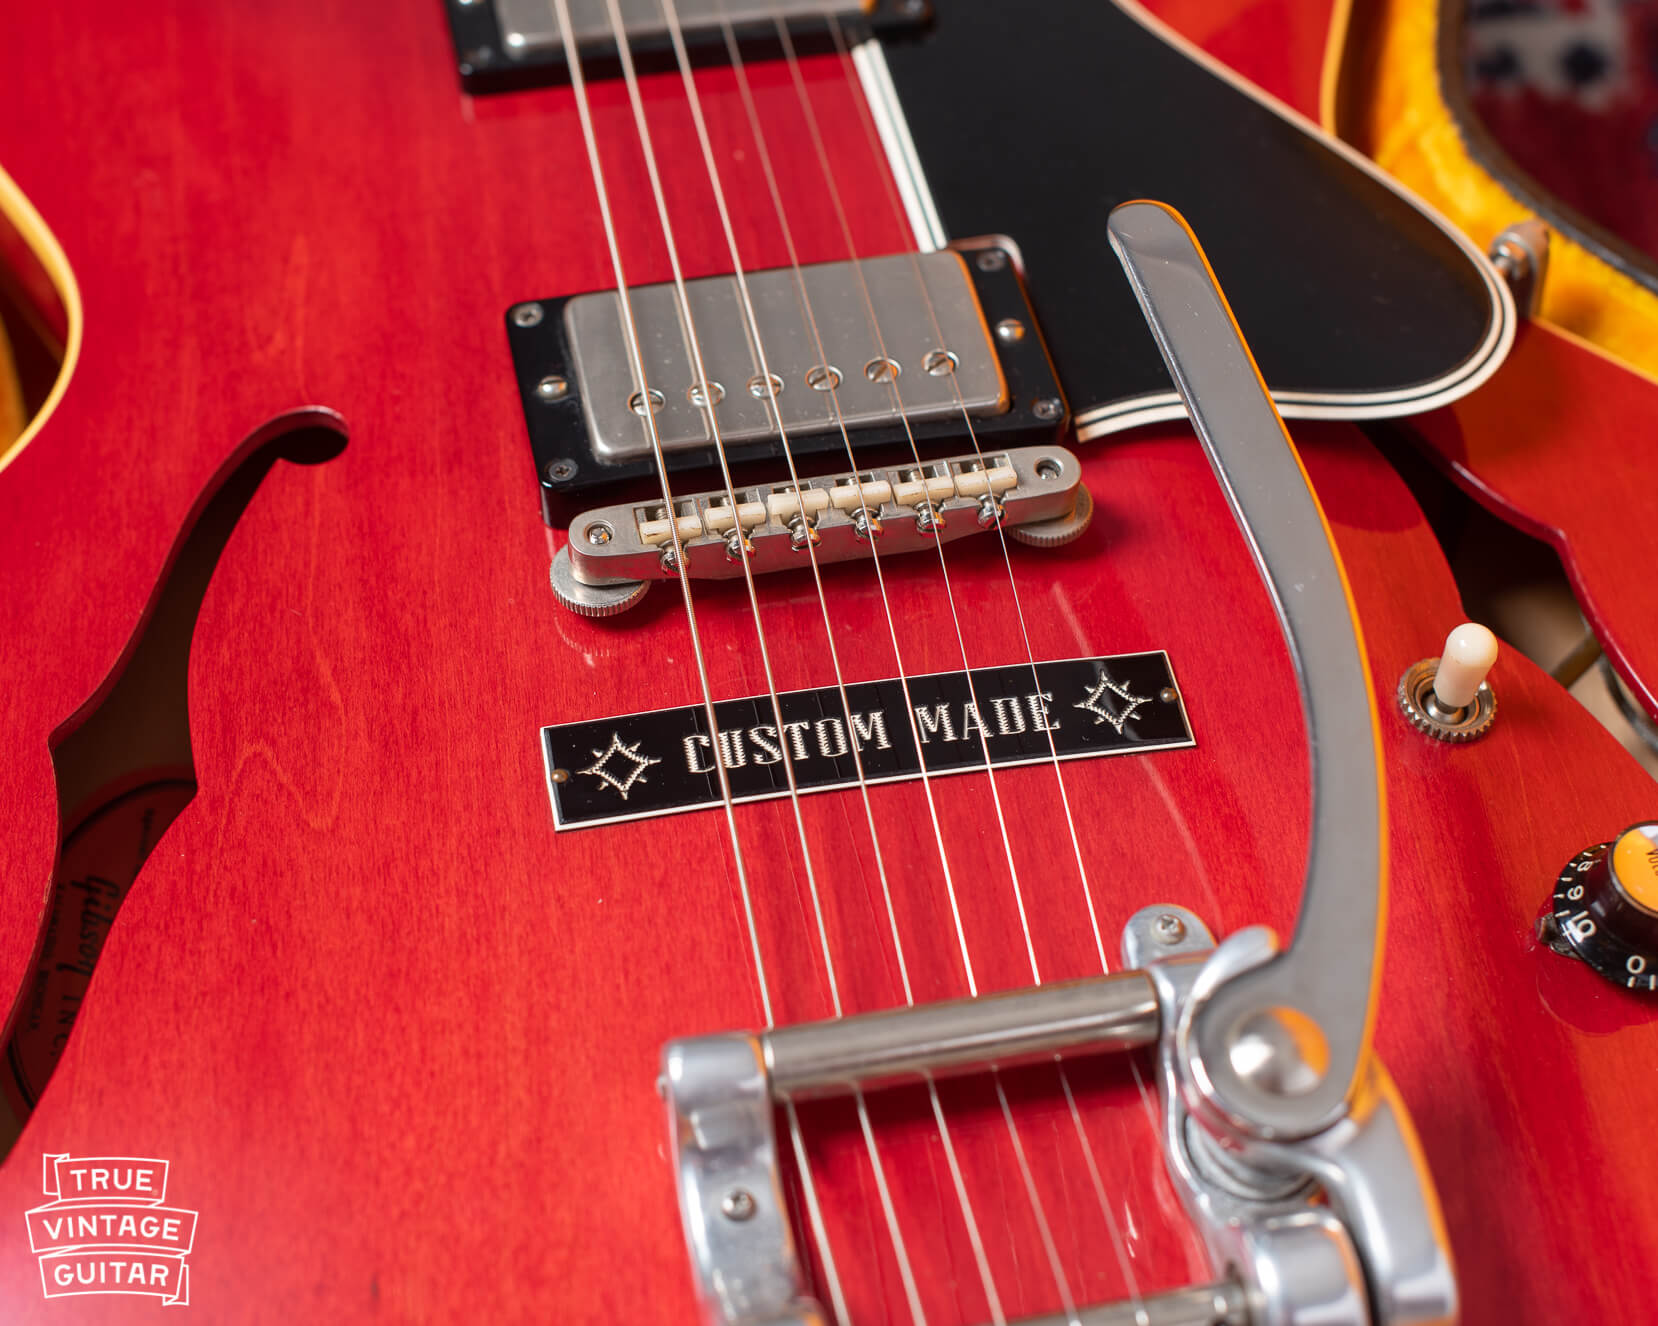 Custom Made plate on a 1963 Gibson ES-335 guitar red